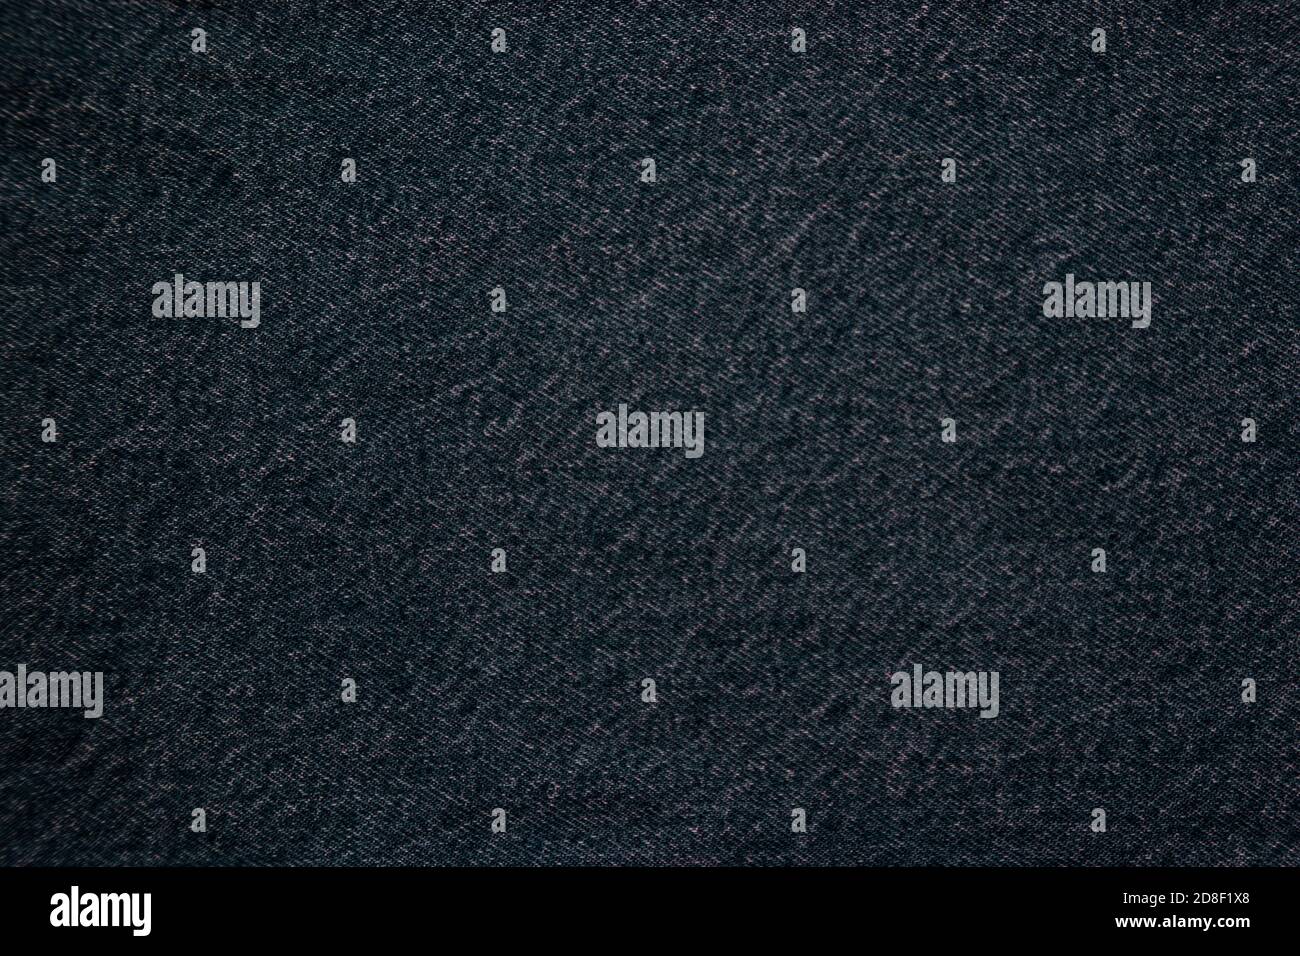 Jeans Fabric Texture High Quality Stock Stock Photo 2226919895 |  Shutterstock